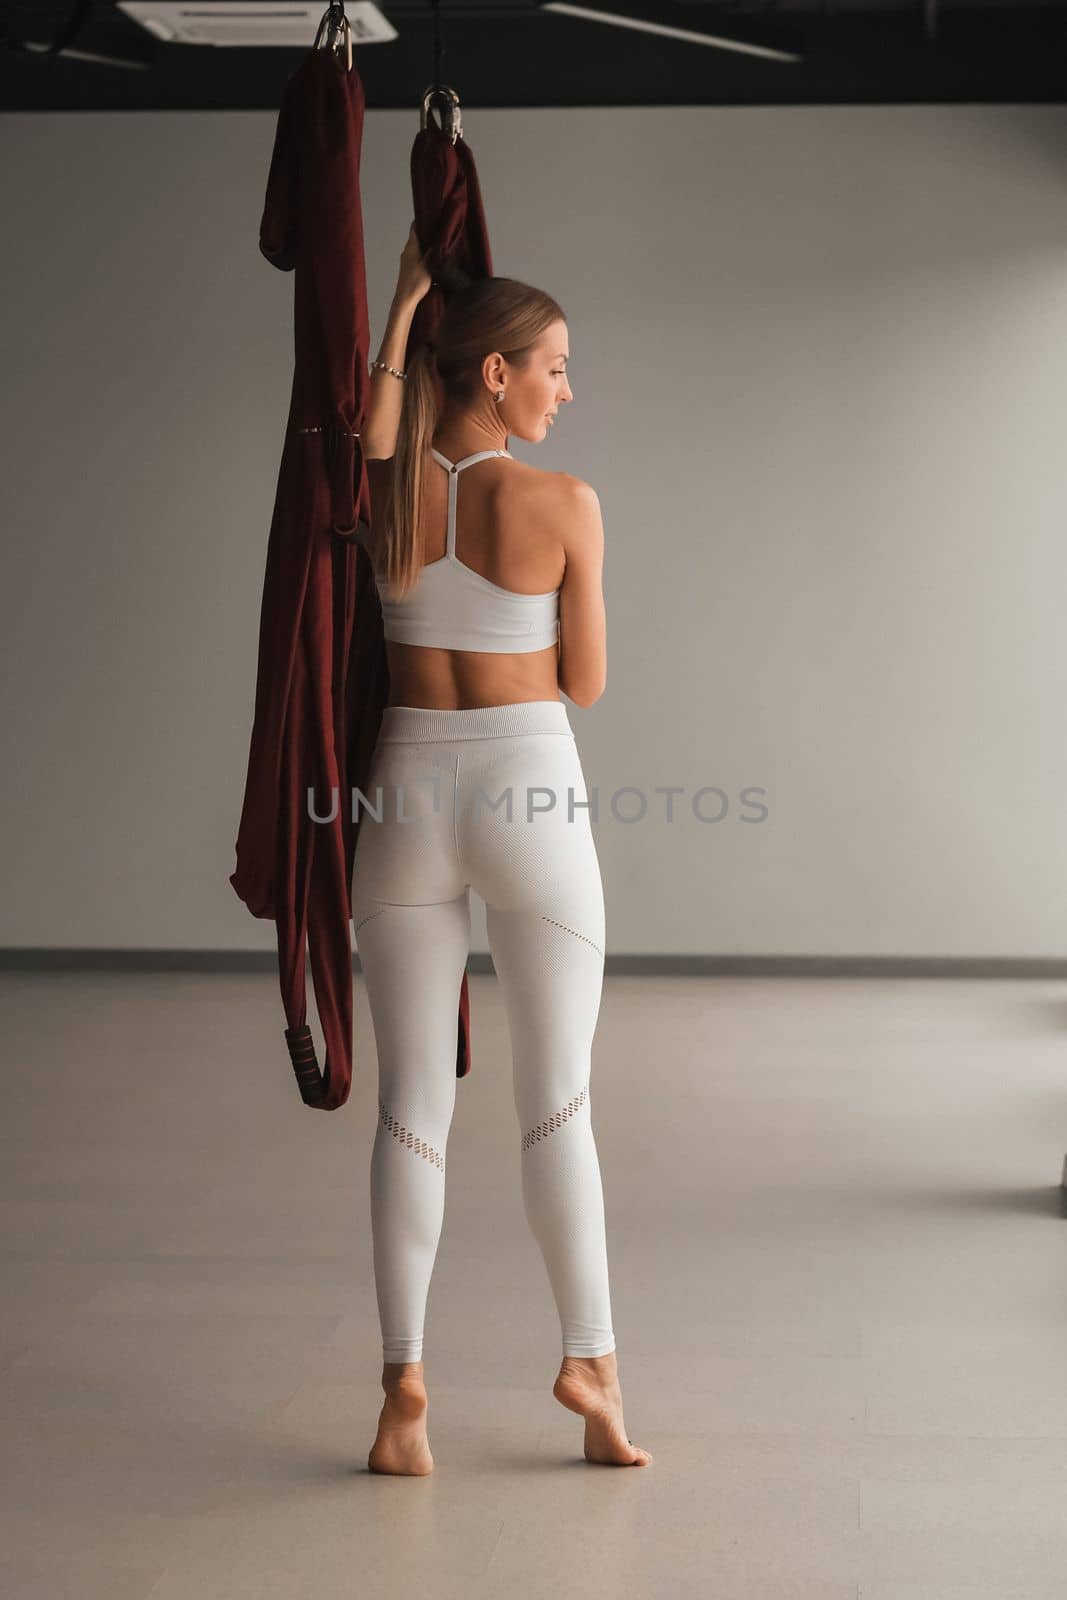 A portrait of a girl in white sportswear stands near a hanging Yoga hammock in the fitness room by Lobachad